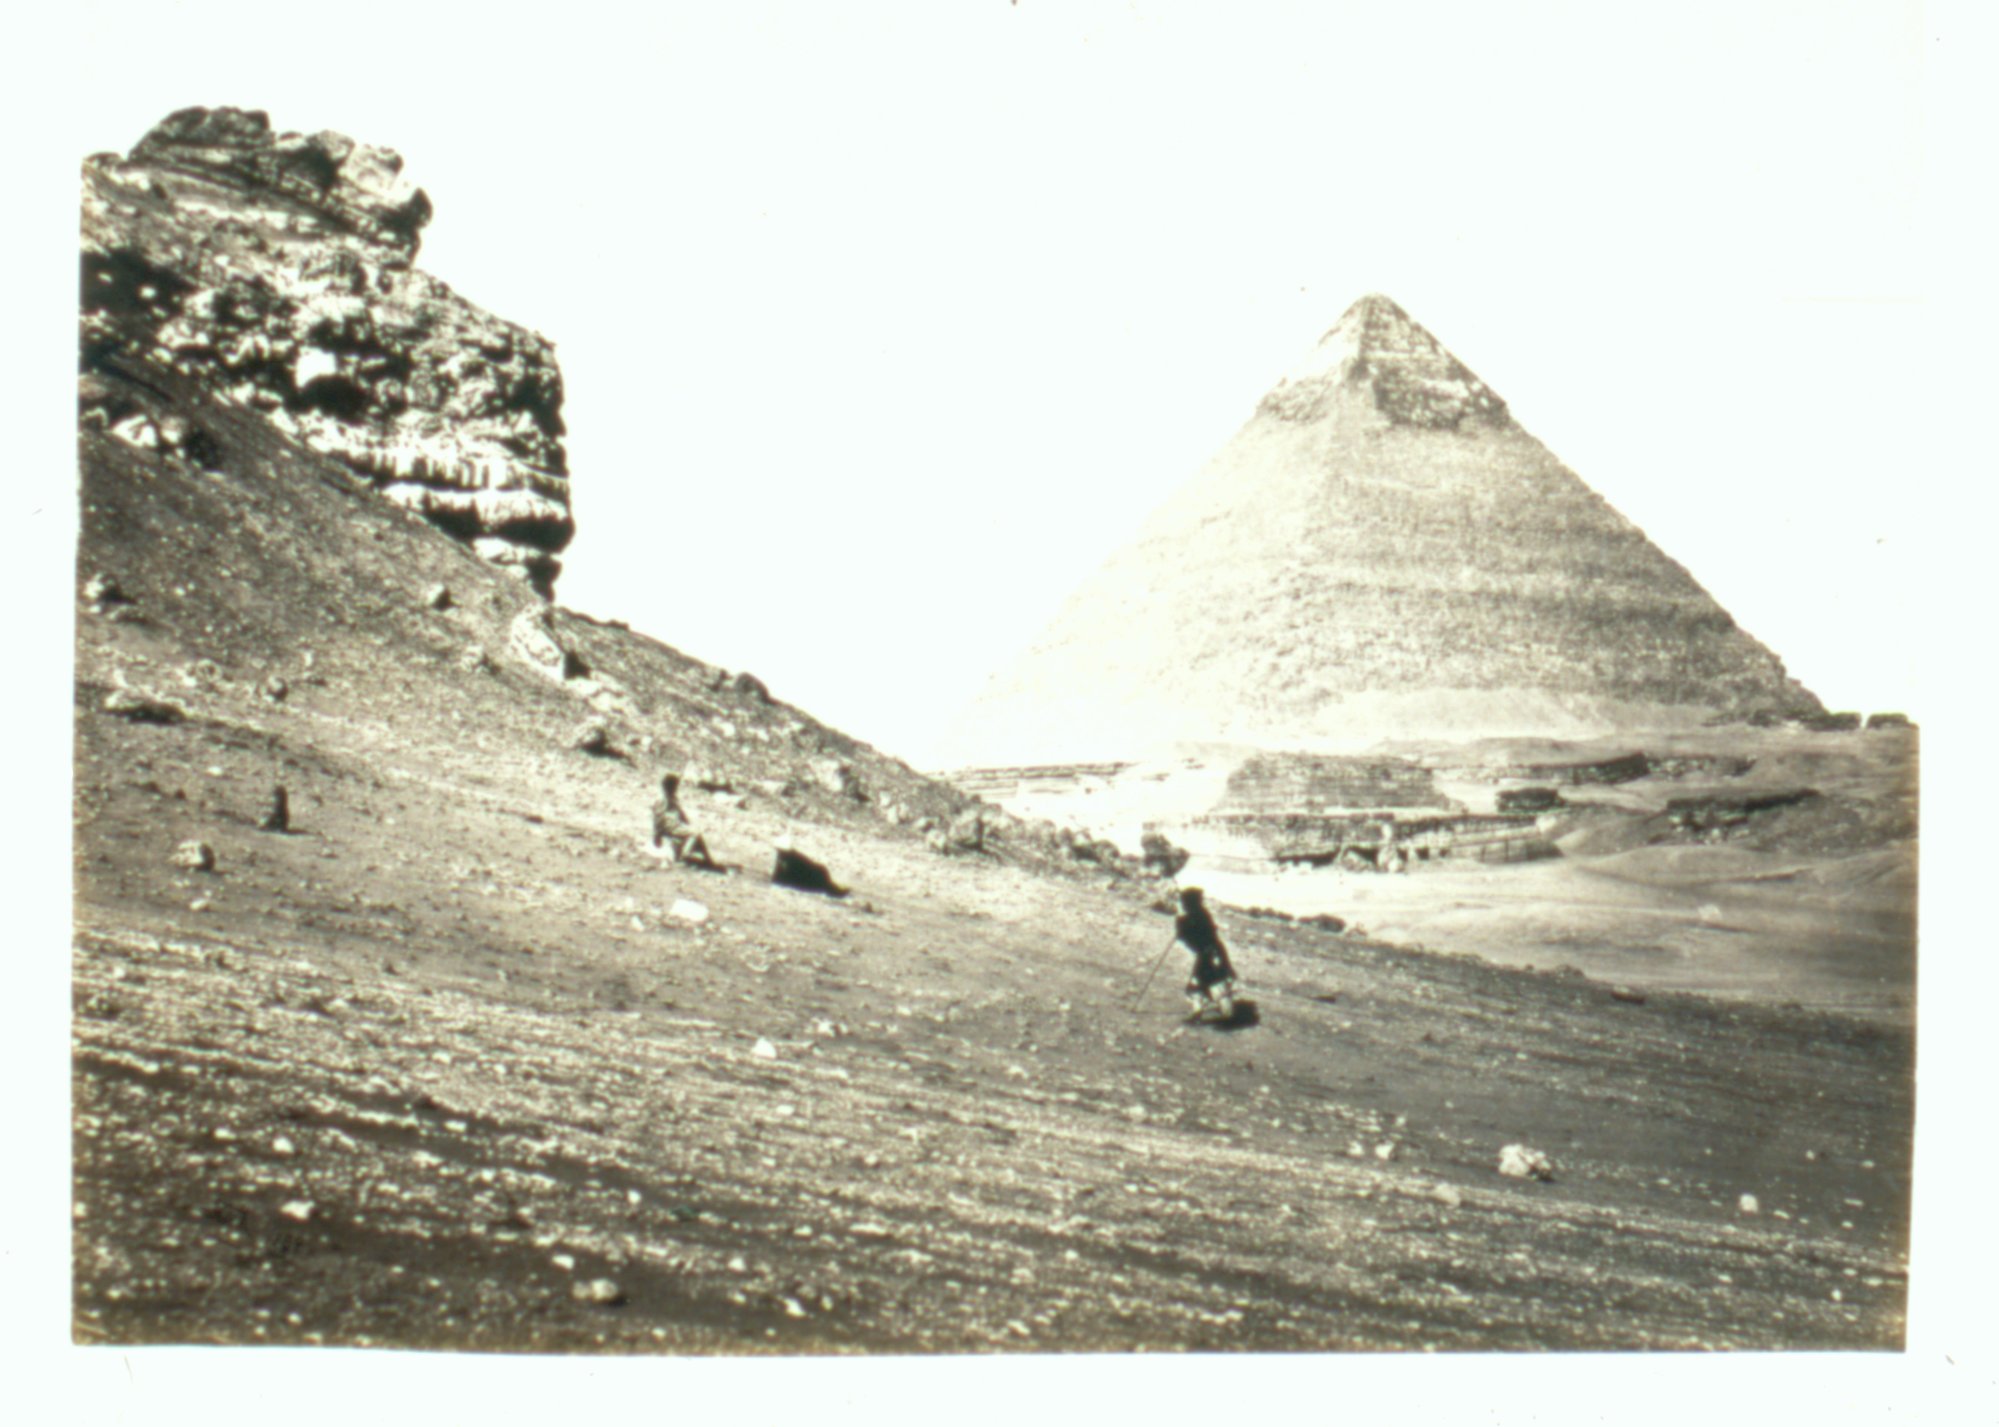 Francis Frith, The Second Pyramid, from the South-East, 1858